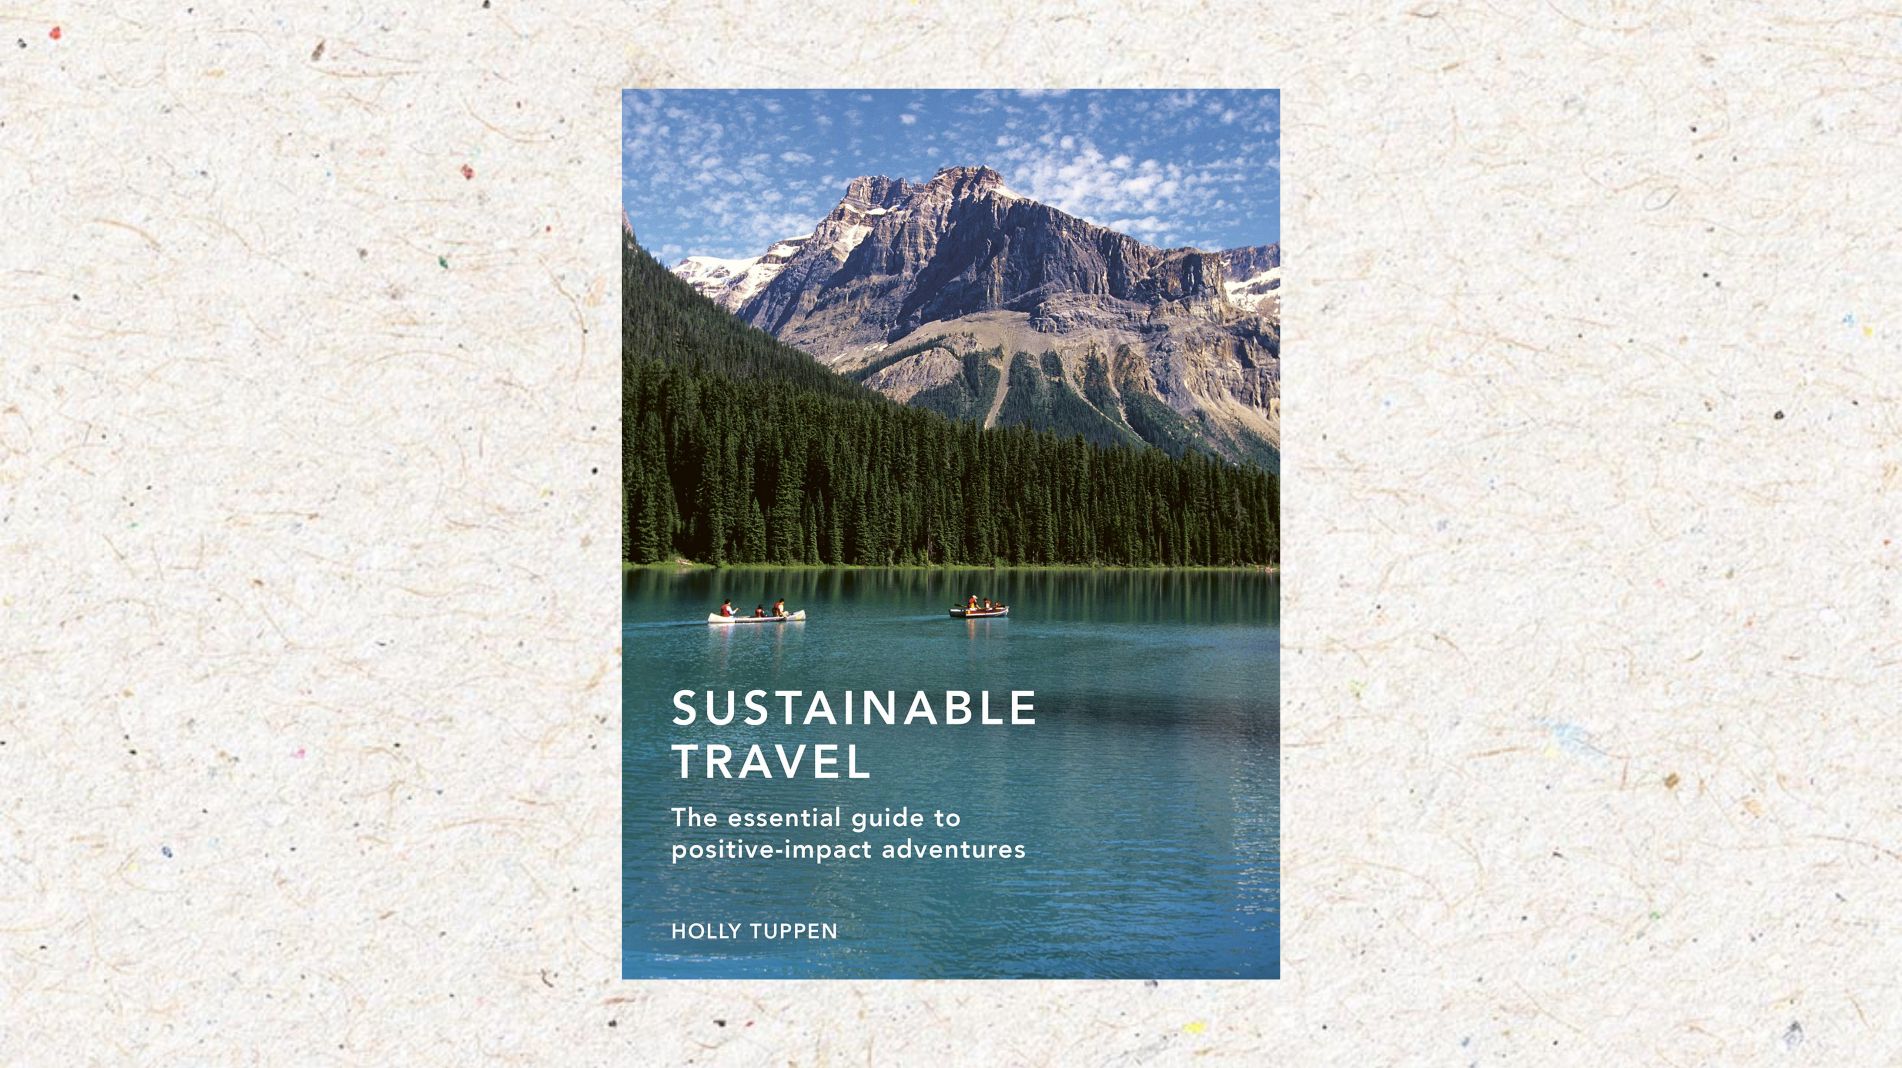 The cover for Sustainable Travel by Holly Tuppen.